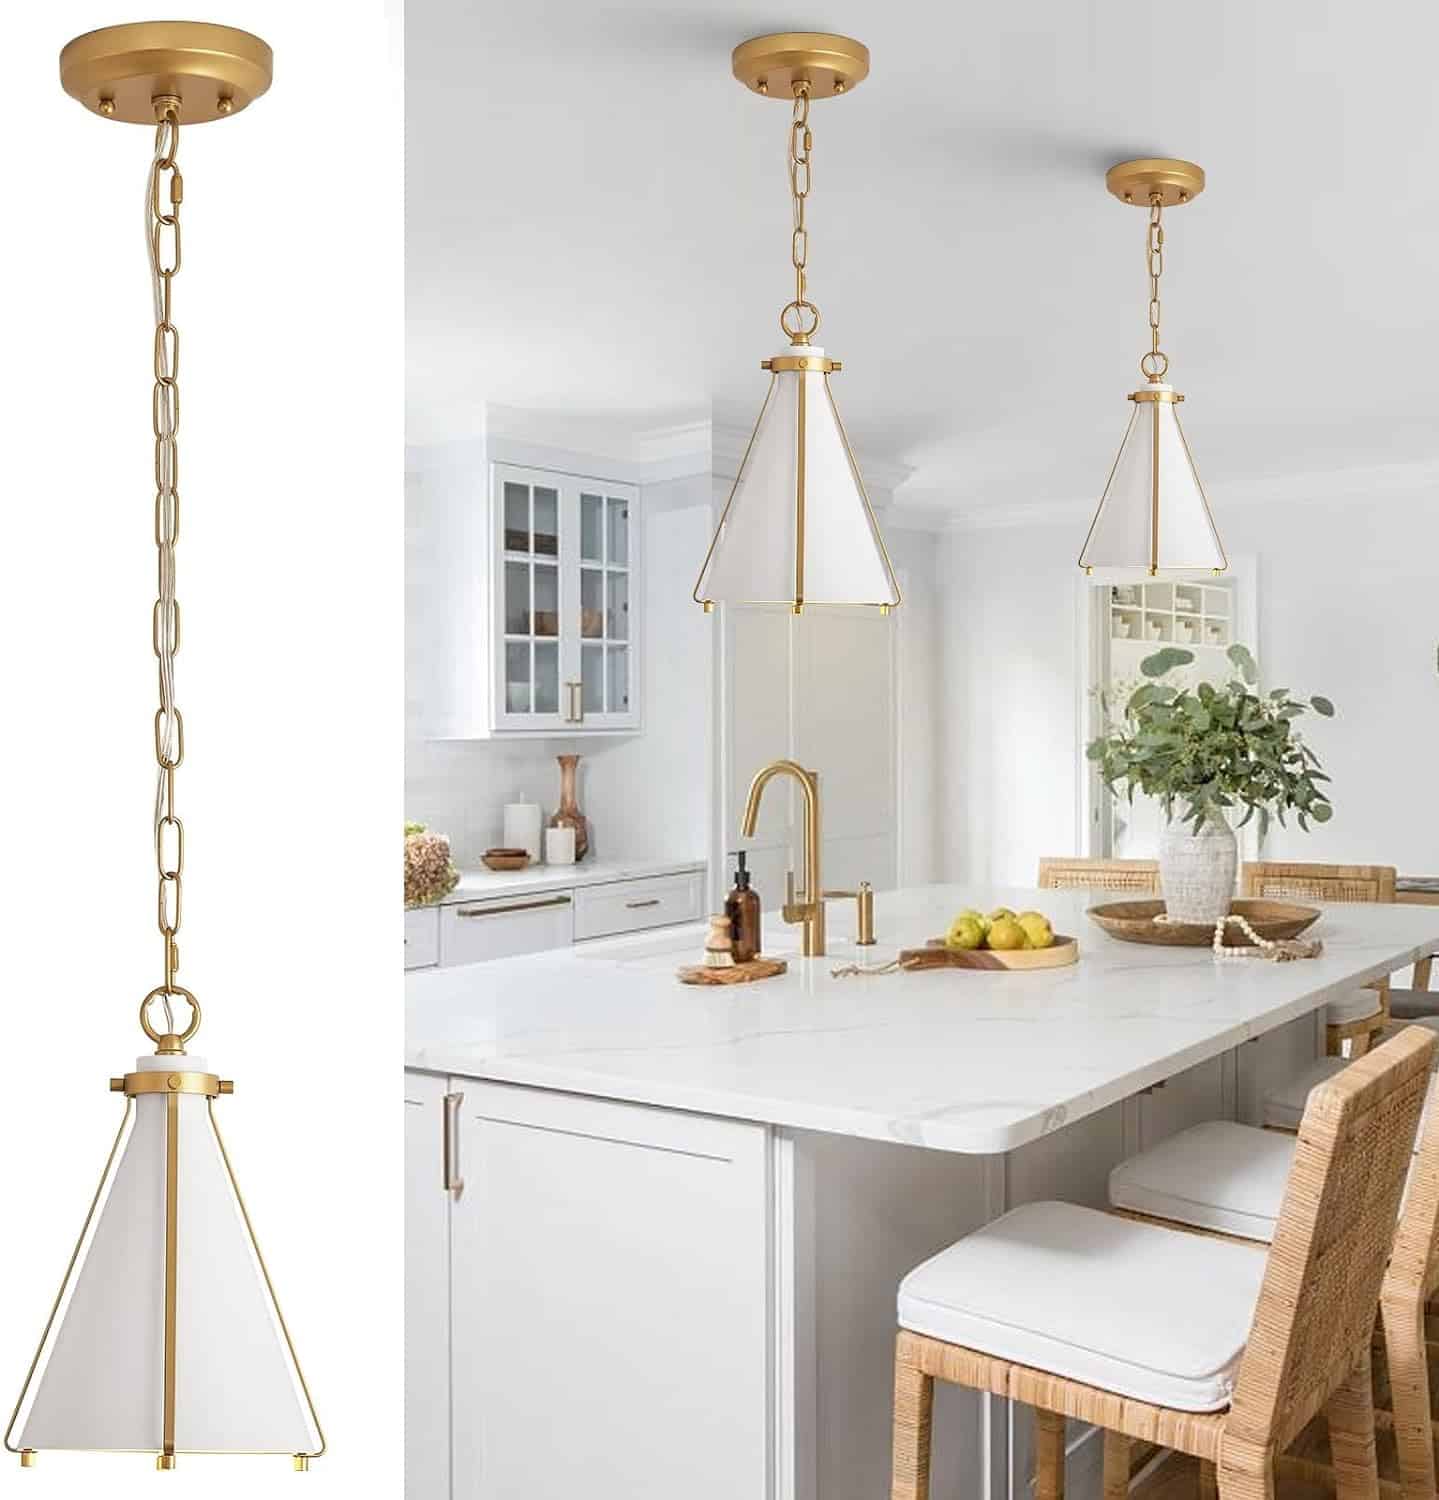 AIRYPHANT Pendant Light Review